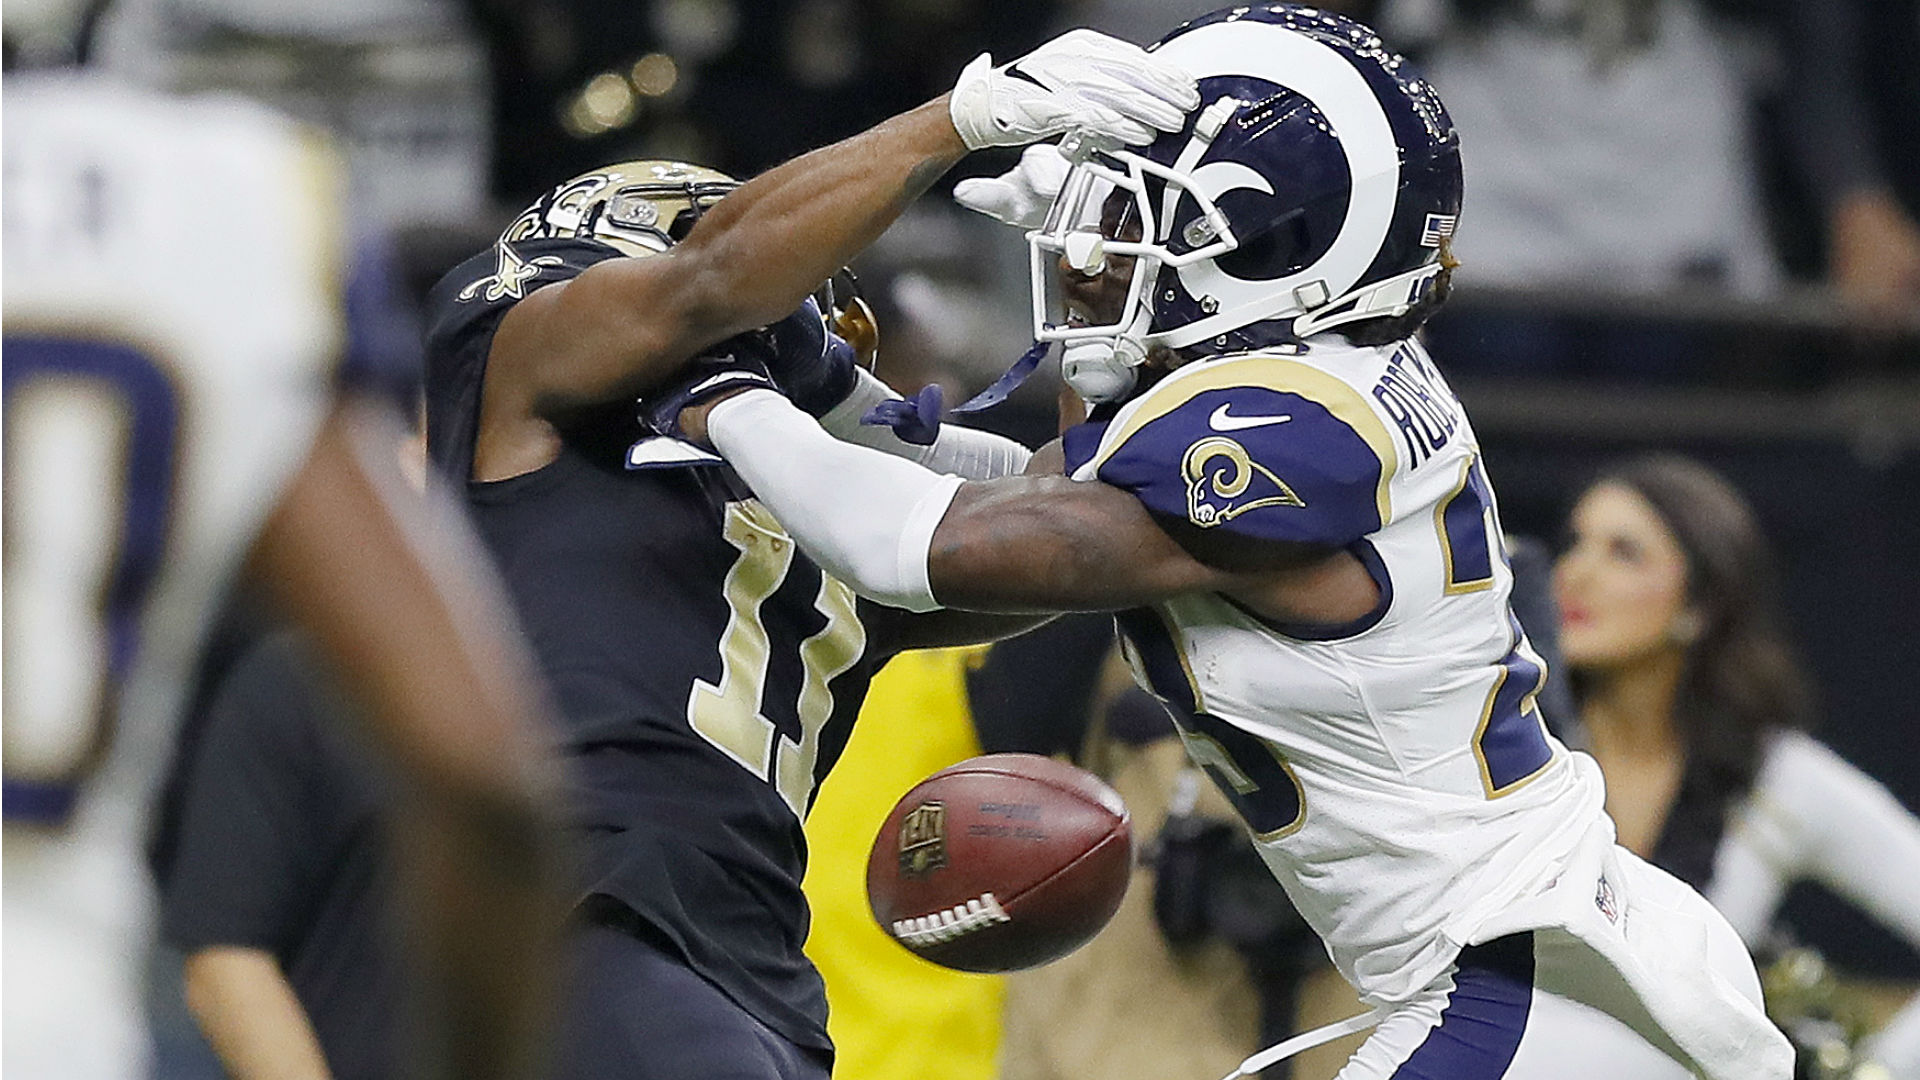 Nickell Robey-Coleman says pass was tipped during controversial no-call play in Rams-Saints game